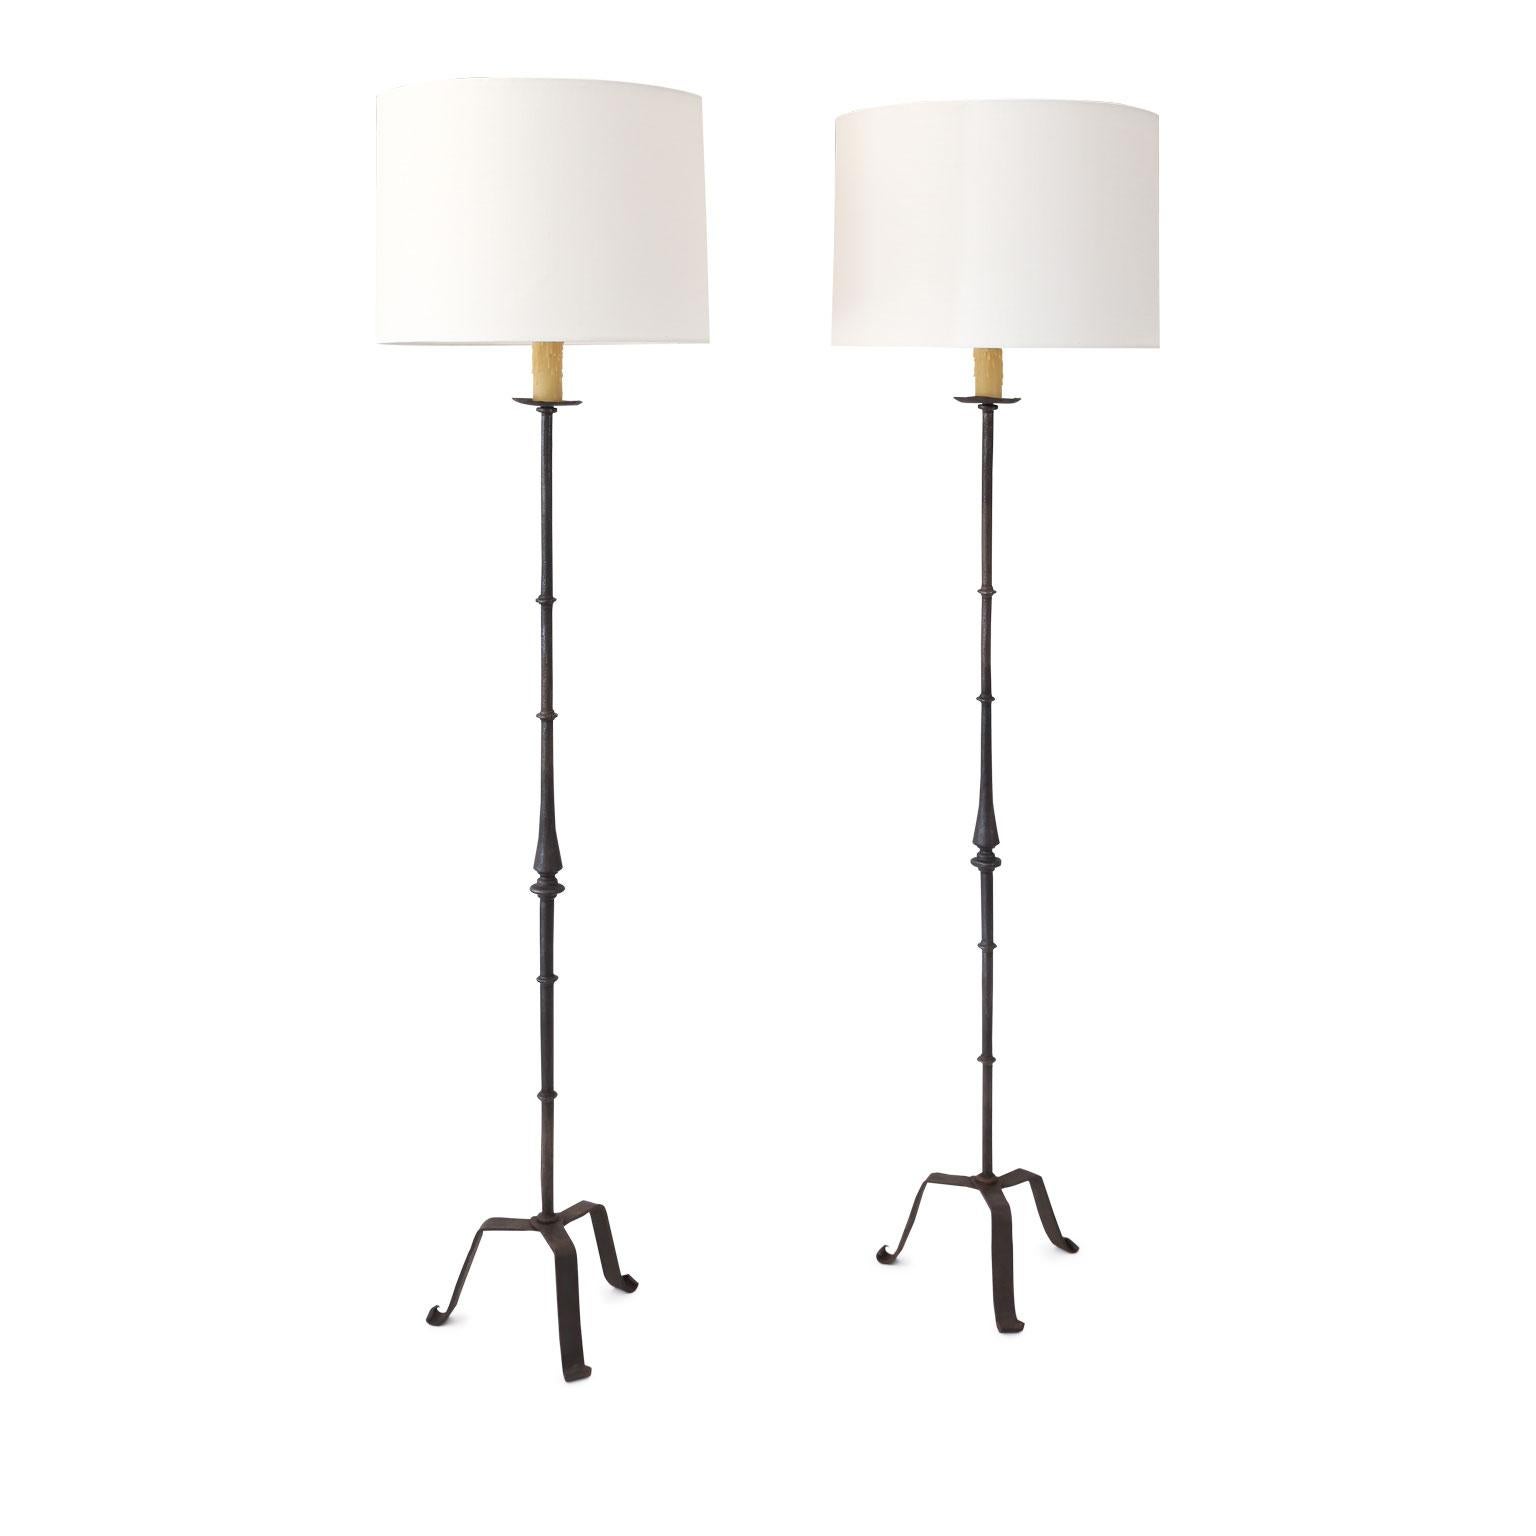 Two Iron Candle Stand Floor Lamps